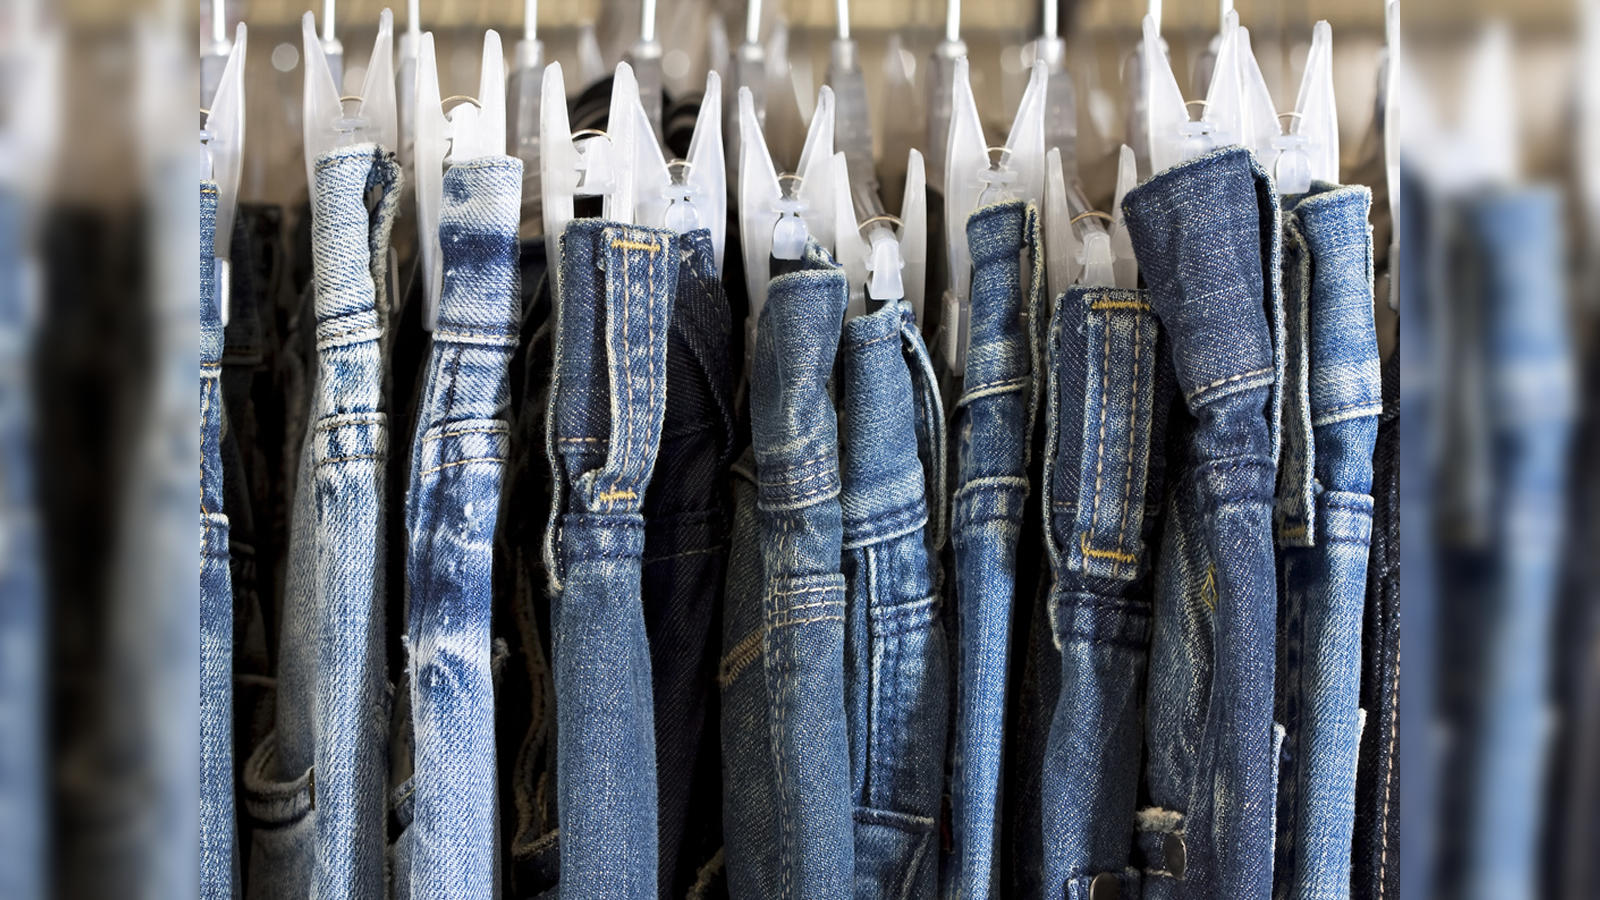 be it work or party denim is in demand domestic jeans market grew 14 in 2018